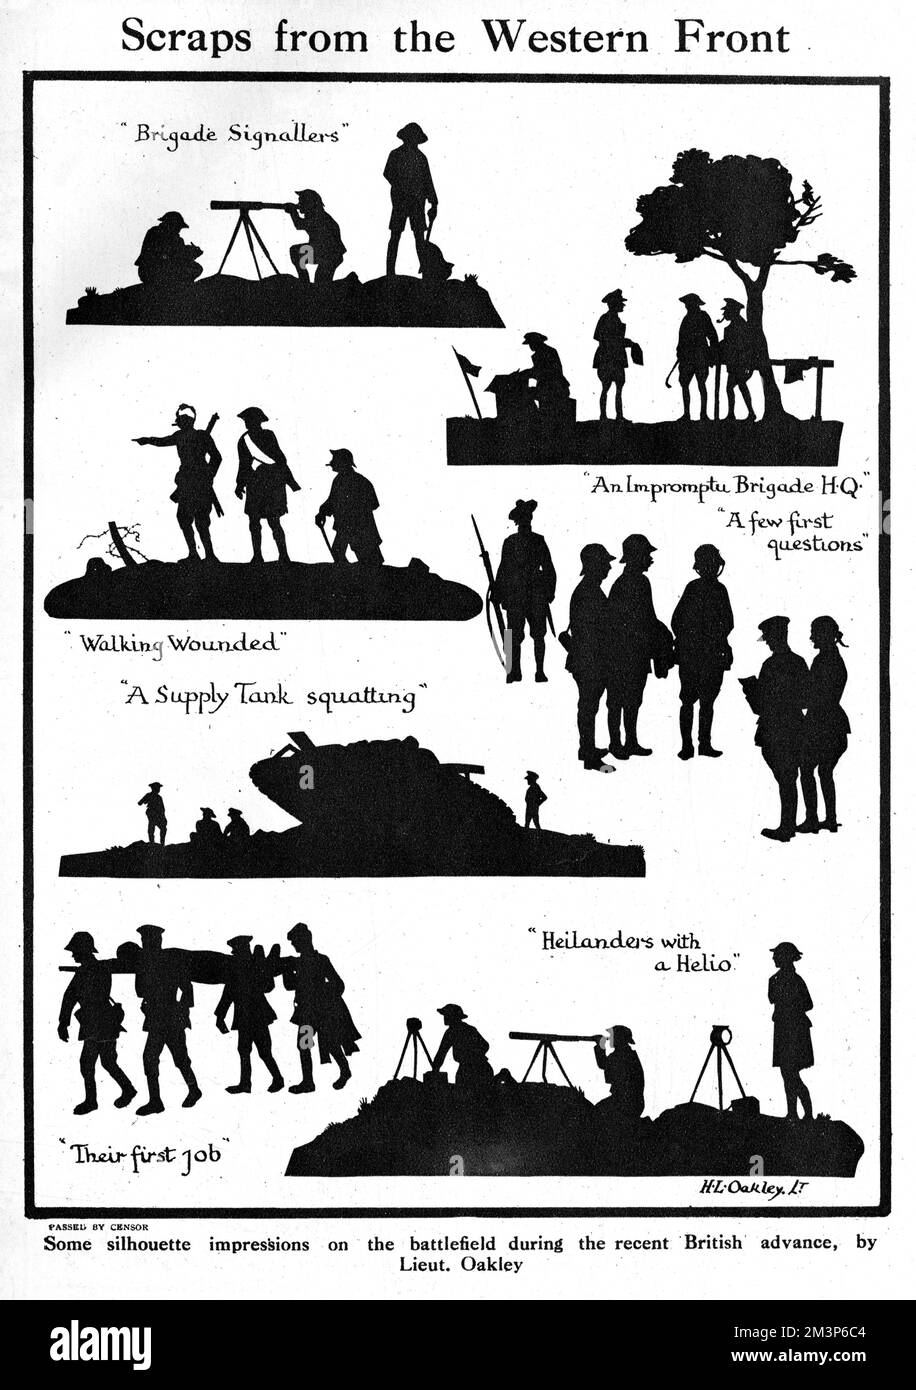 Some Silhouette Impressions On The Battlefield During A British Advance